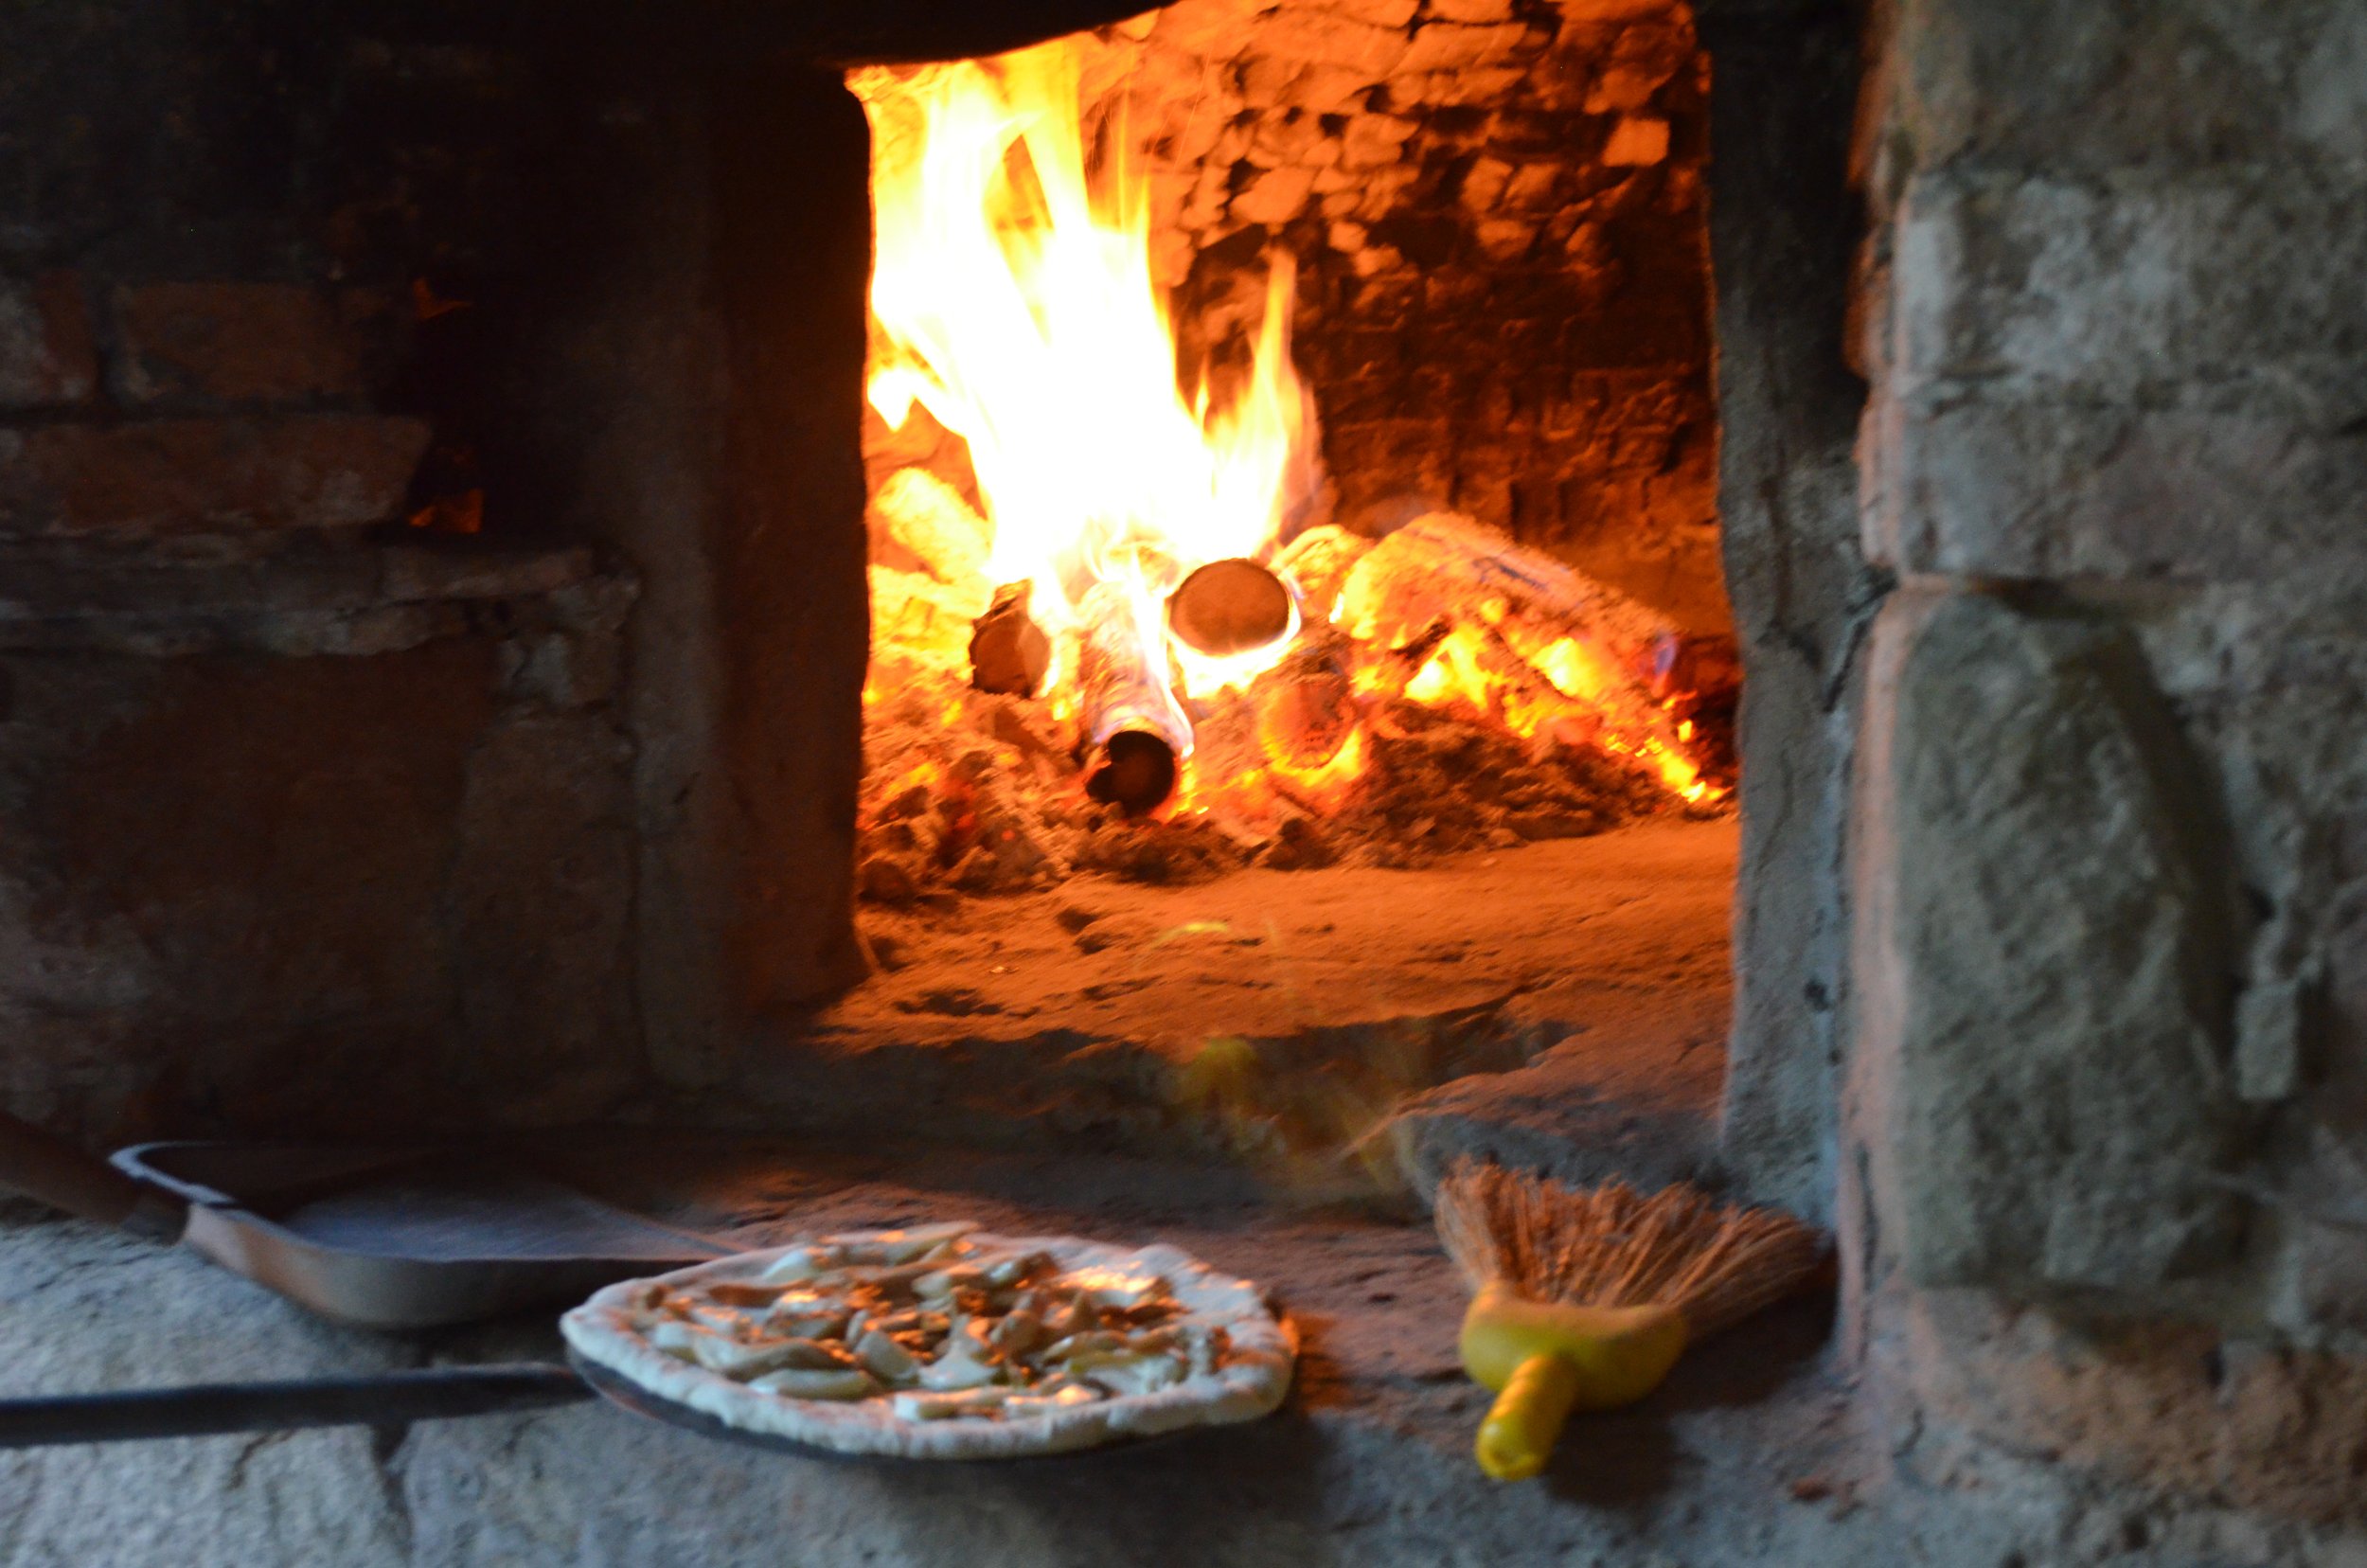  bread oven in action 